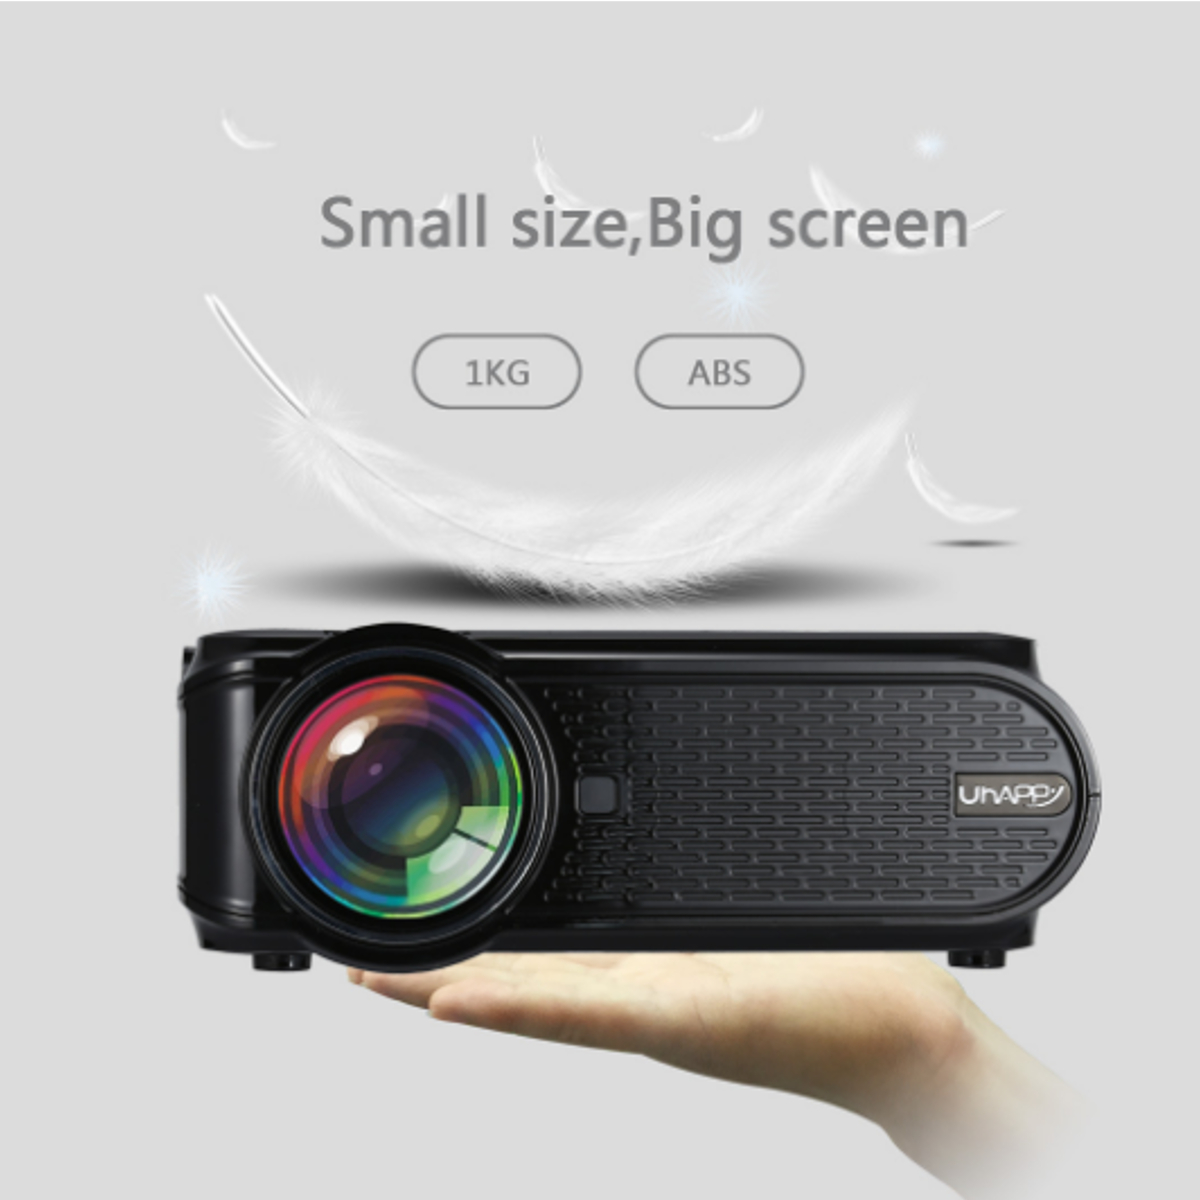 UHAPPY U90 Black Android 6.0 2000 Lumens LED WiFi bluetooth 4.0 Projector 800 x 480 Support 1080p 14